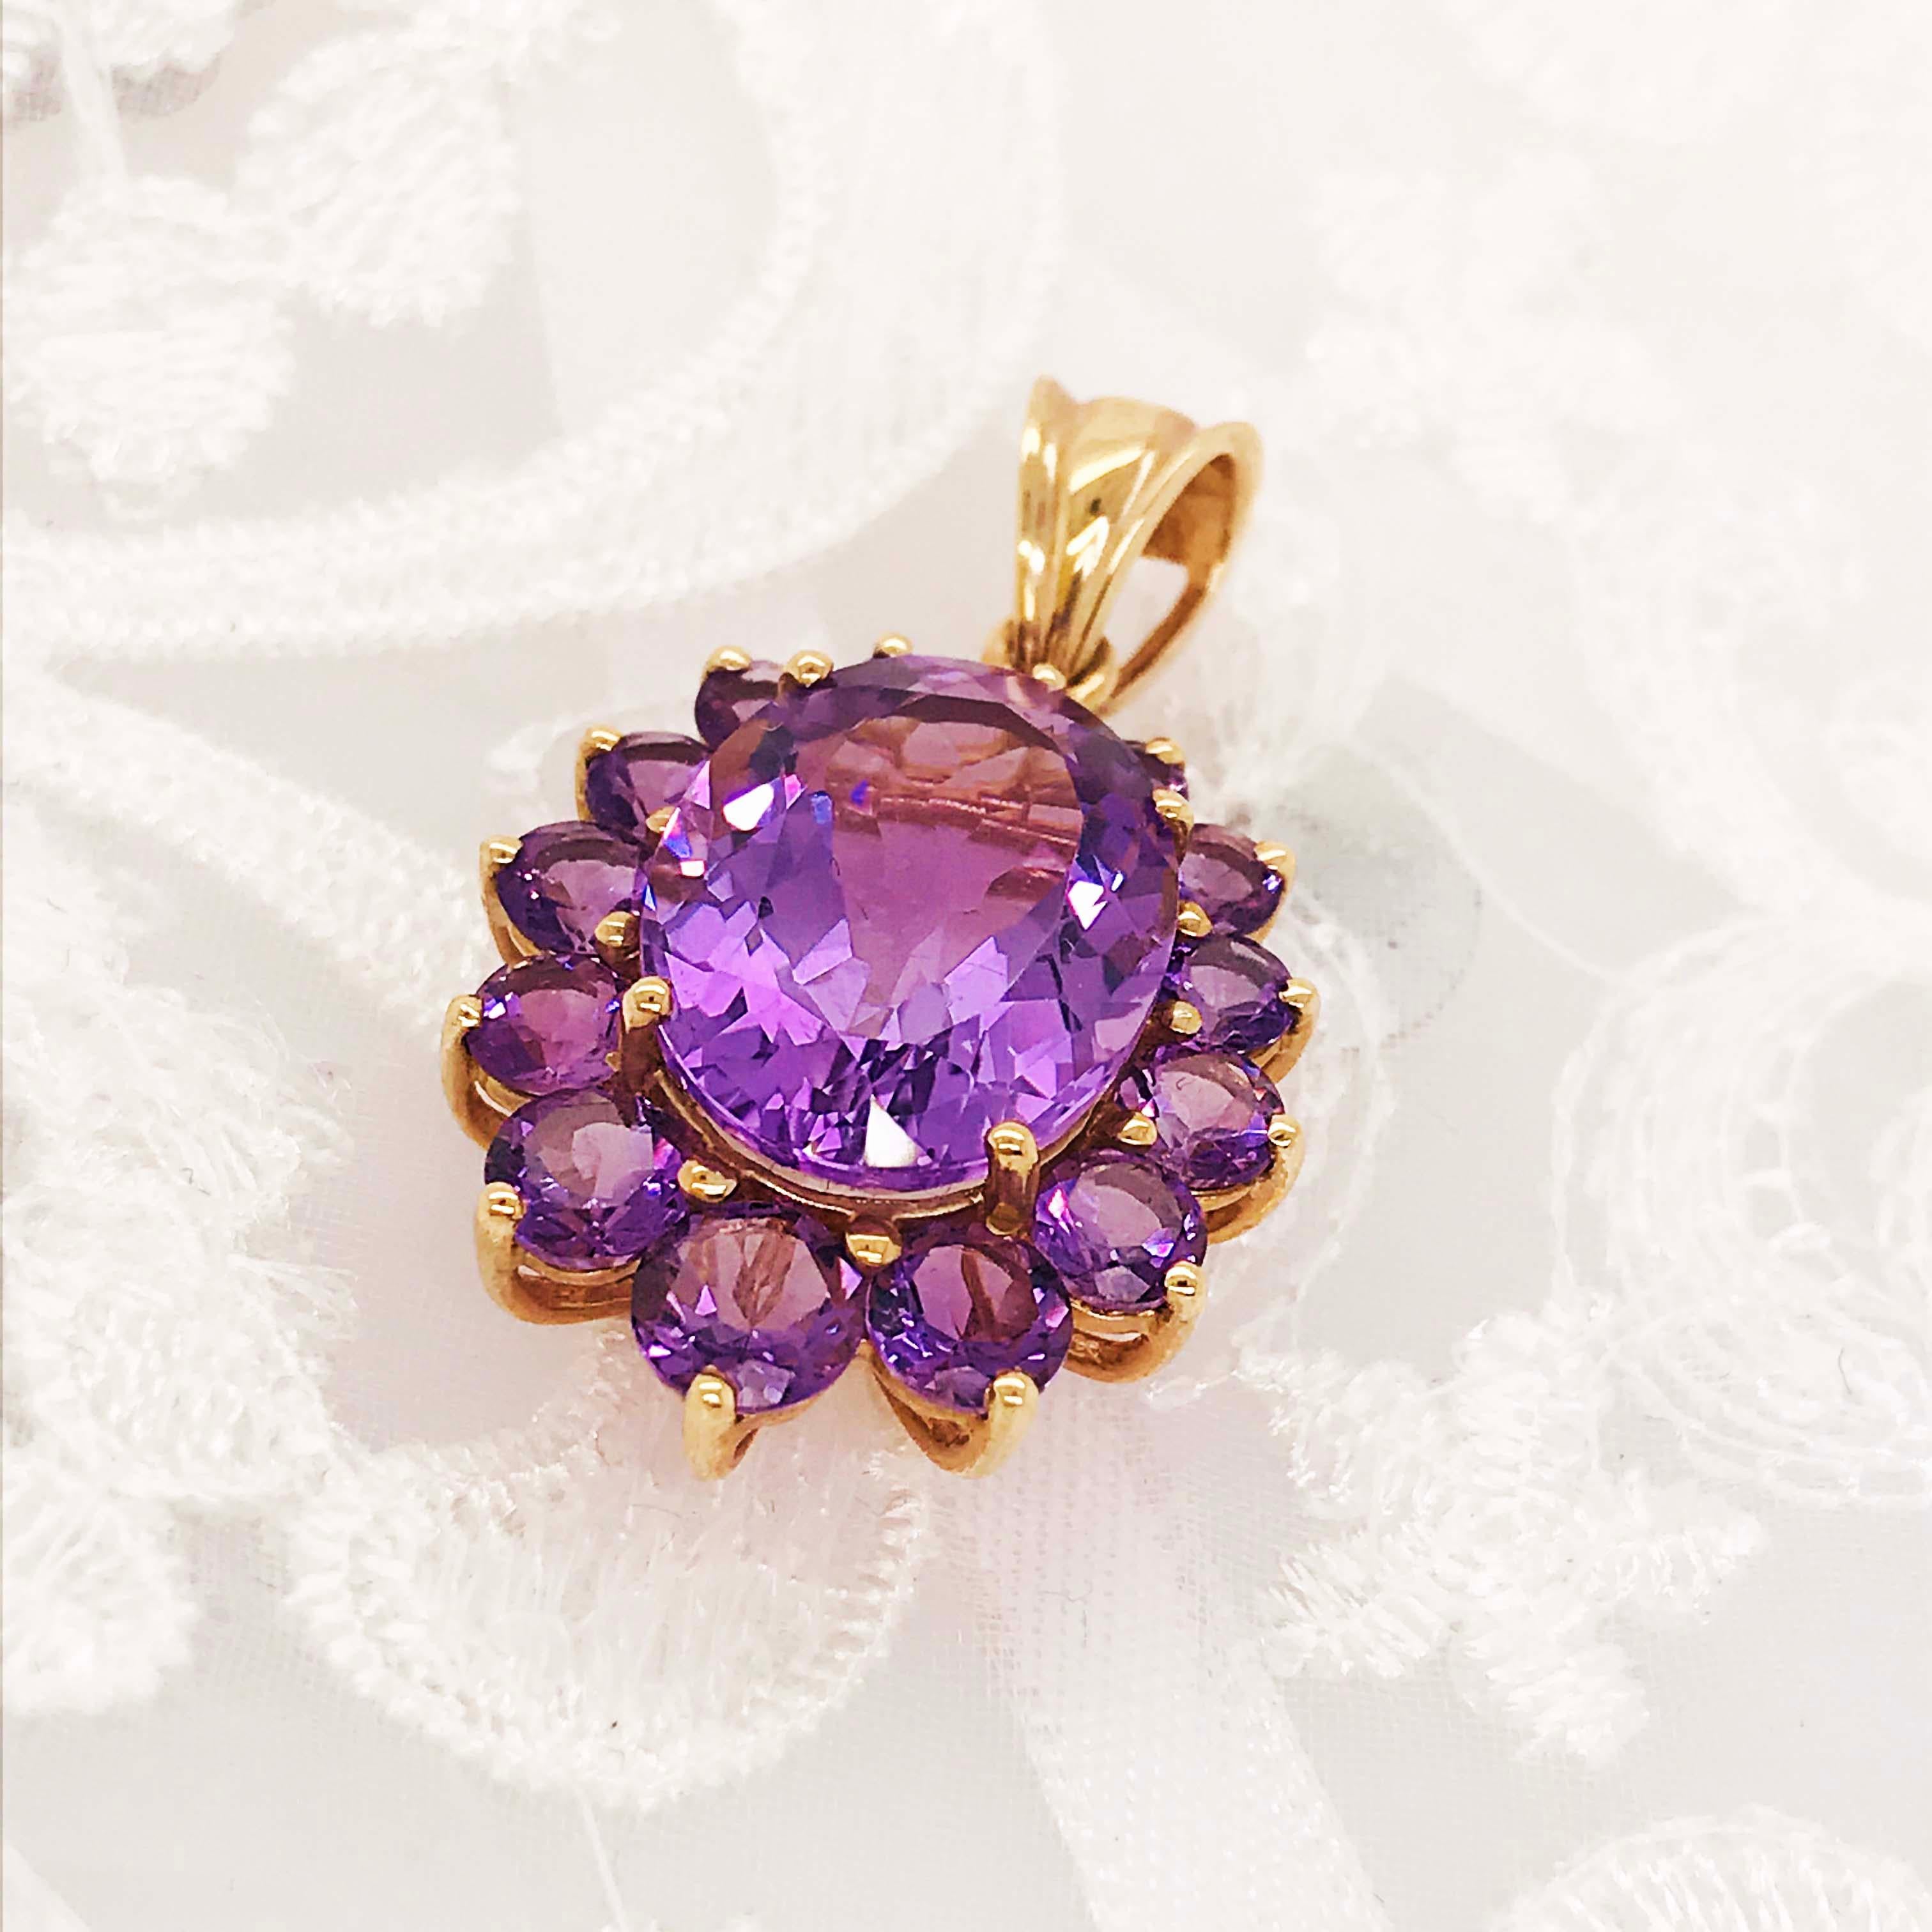 Modern 12 Carat Oval and Round Amethyst Custom Women's Power Pendant or Women’s Rights